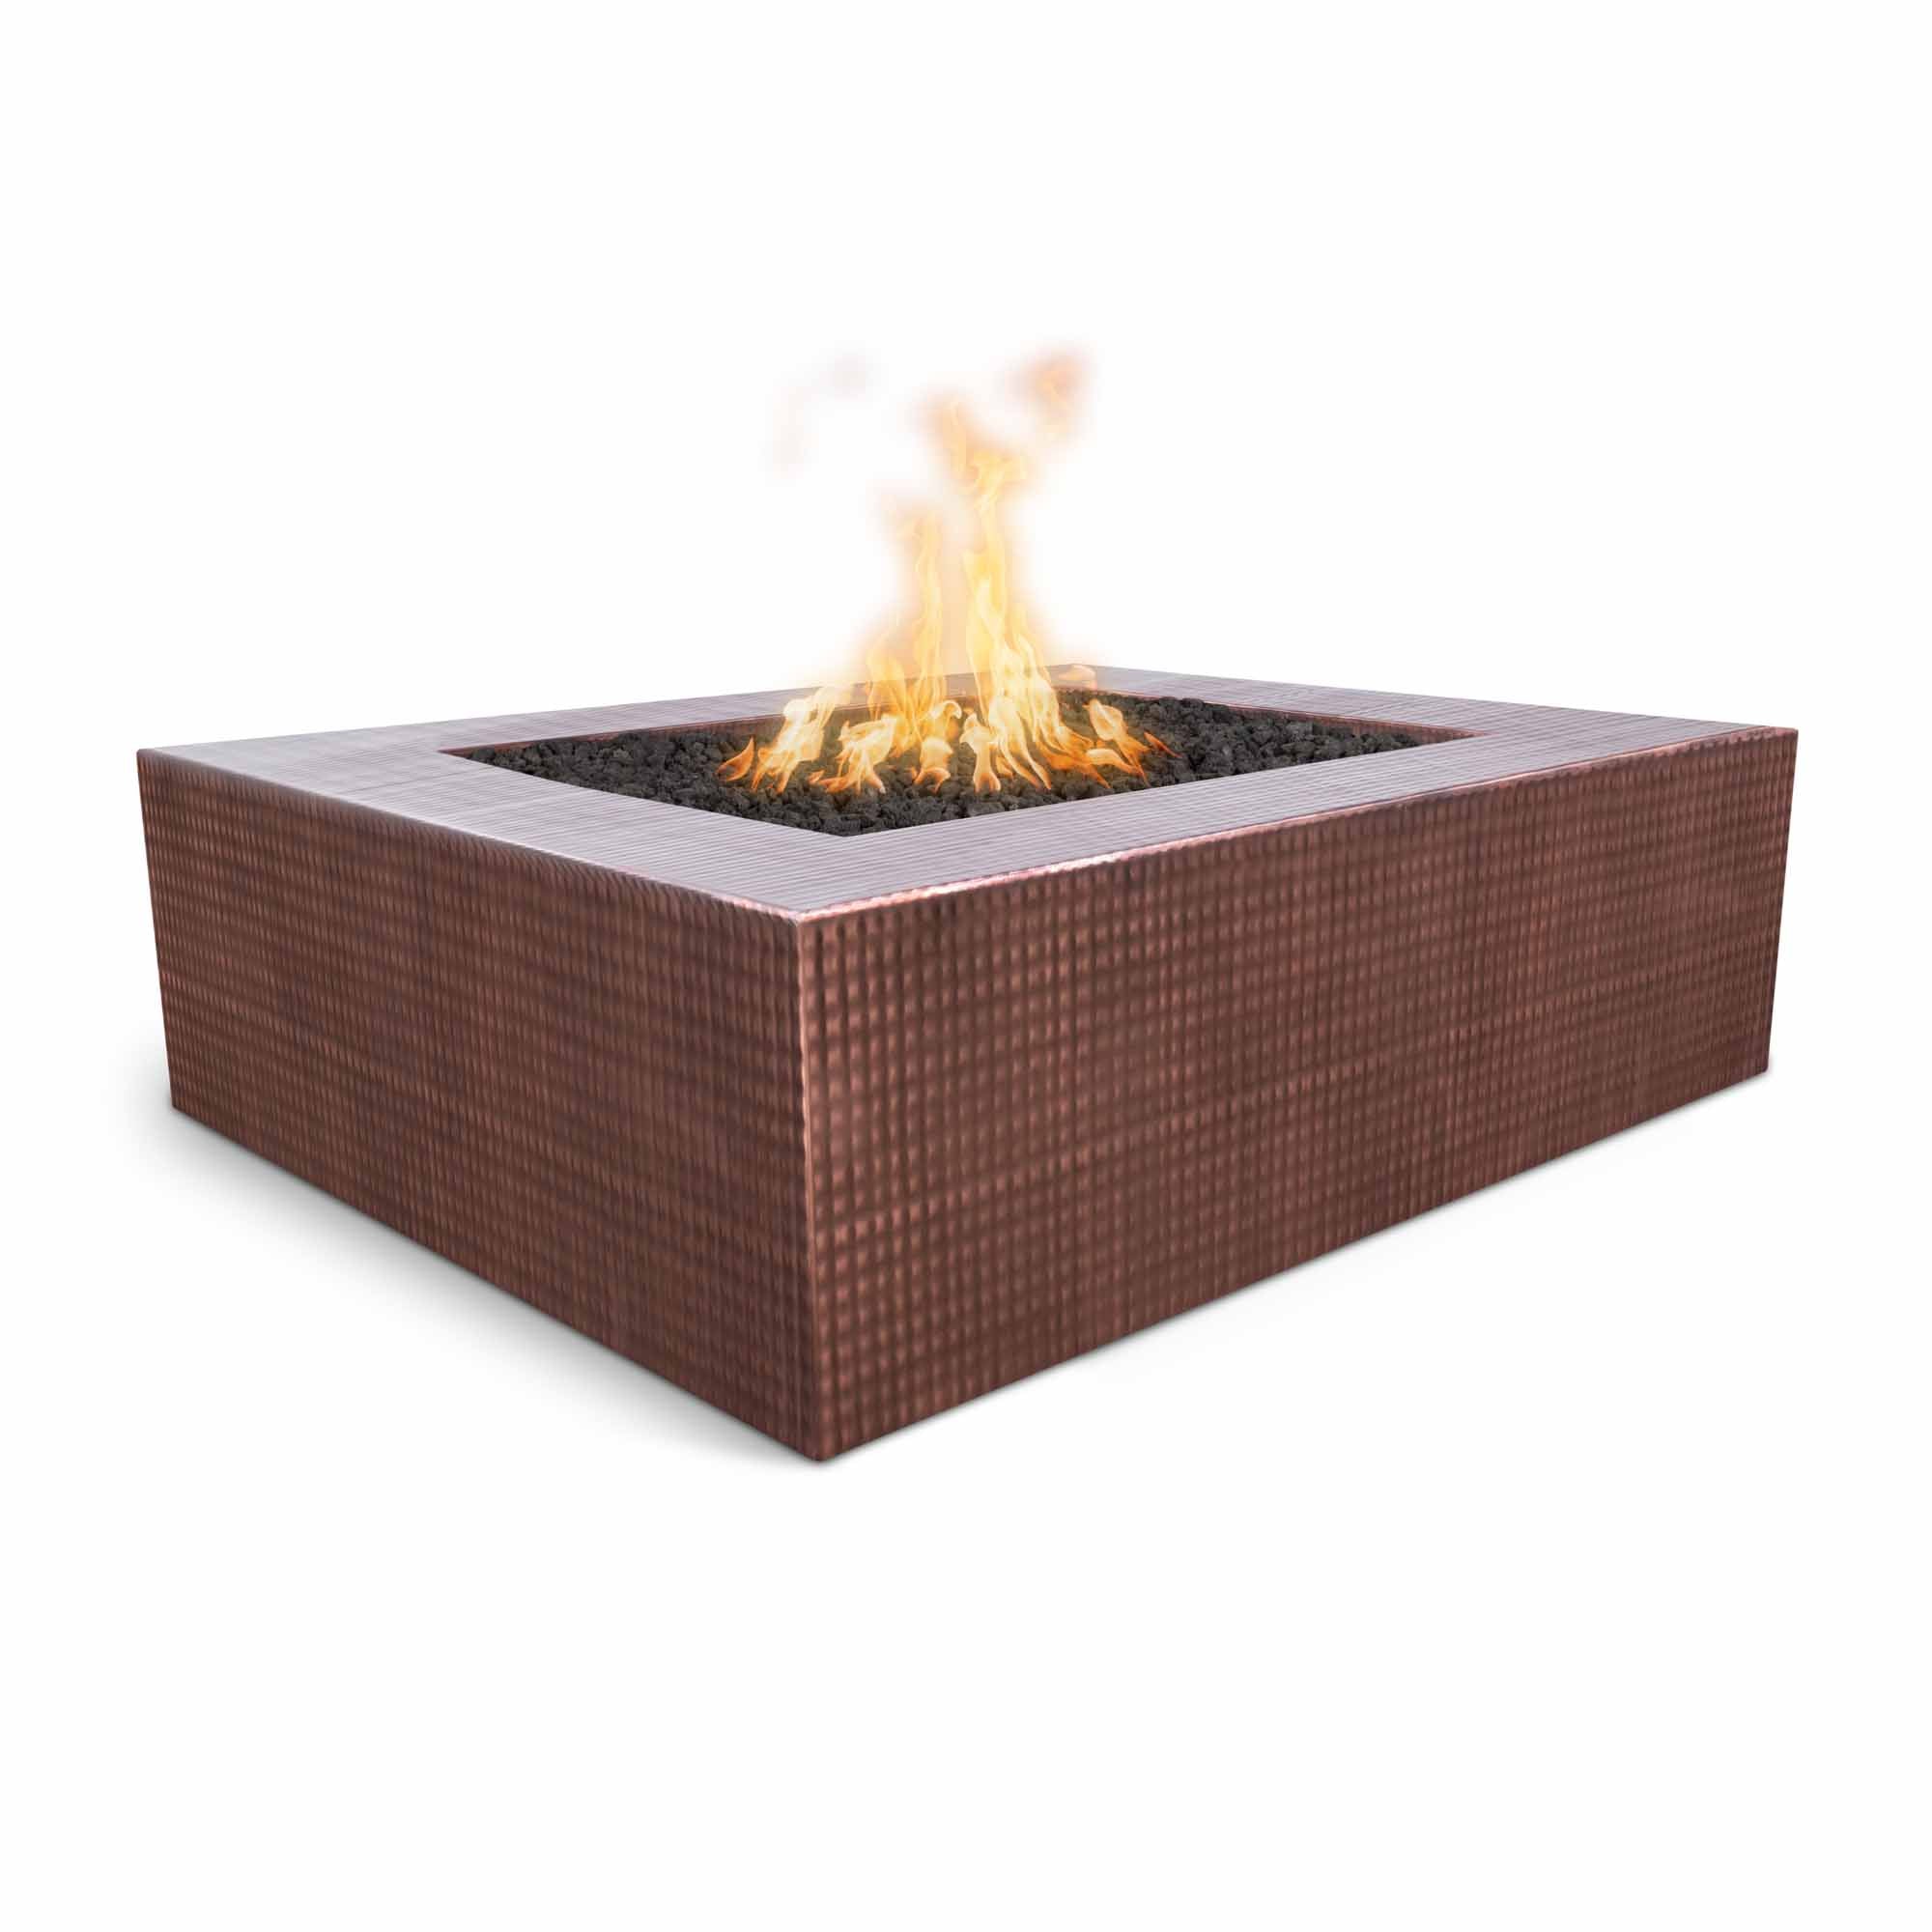 The Outdoor Plus Quad Fire Pit Copper OPT-QDCPRXX - Serenity Provision